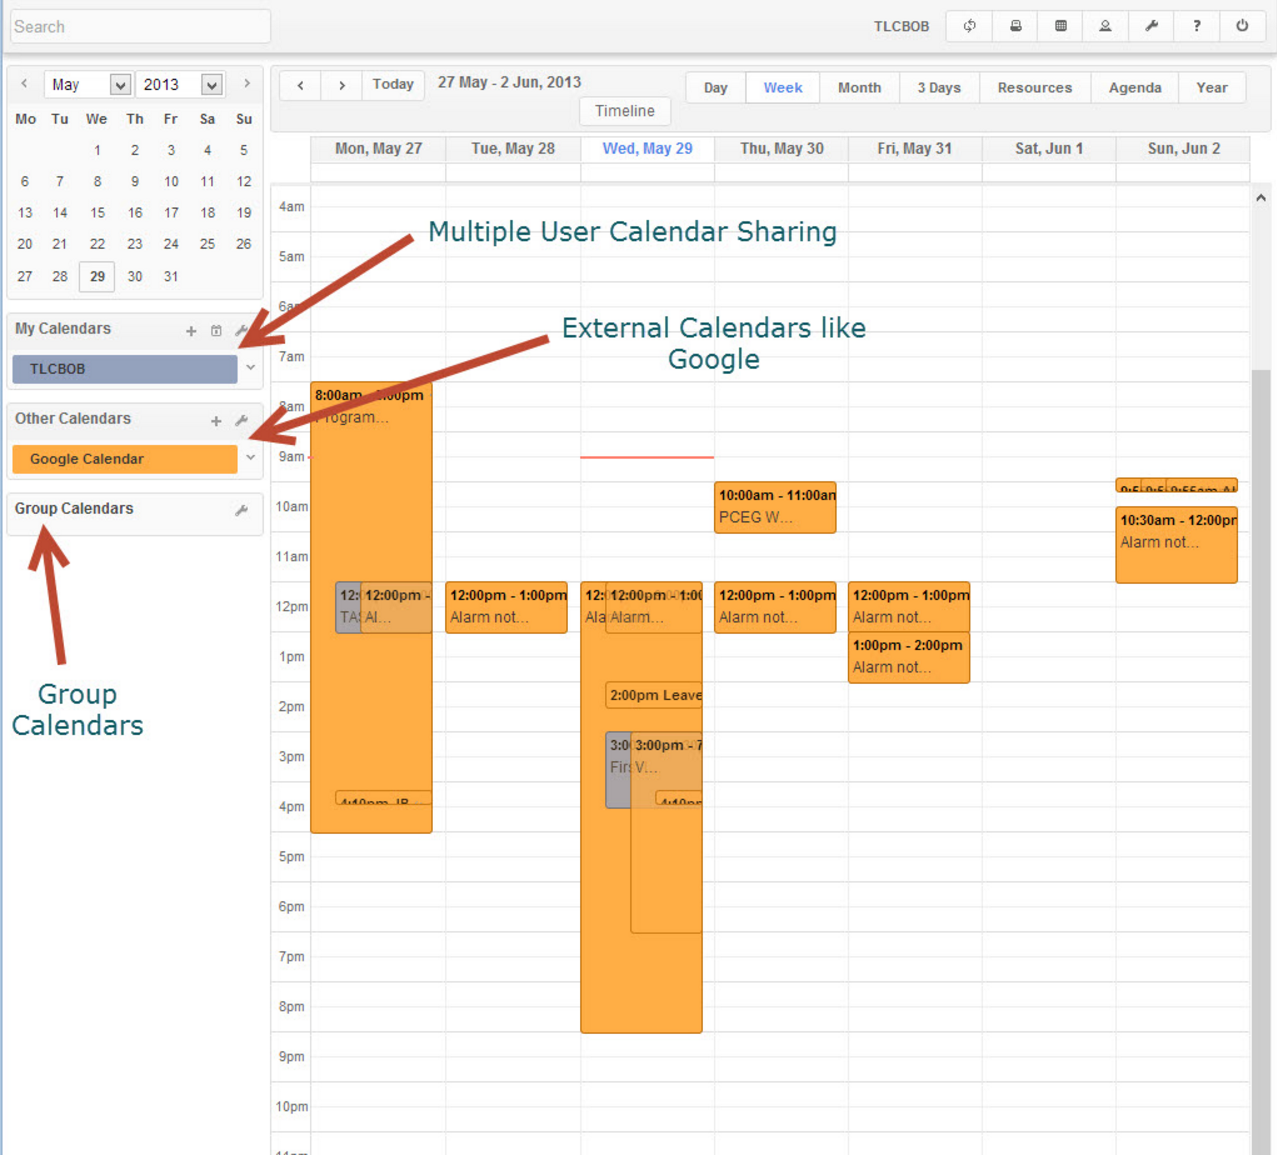 STARS Software - Smart calendar feature allows to view daily activity and appointments scheduled for users